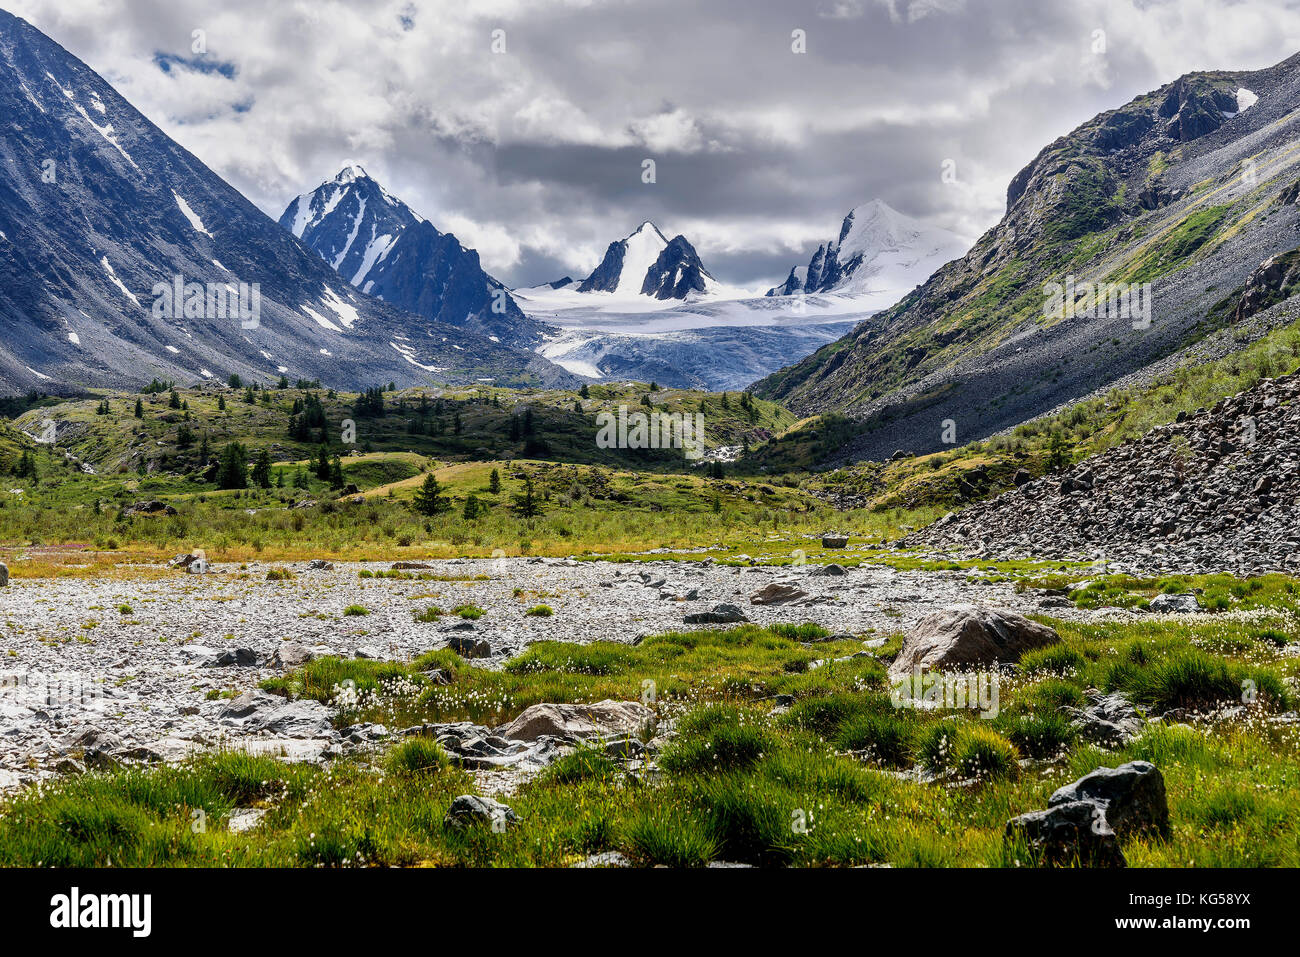 Beautiful view with mountains, pointed snowy peaks, glacier and white fluffy flowers of Eriophorum on stones against the background of a cloudy sky in Stock Photo